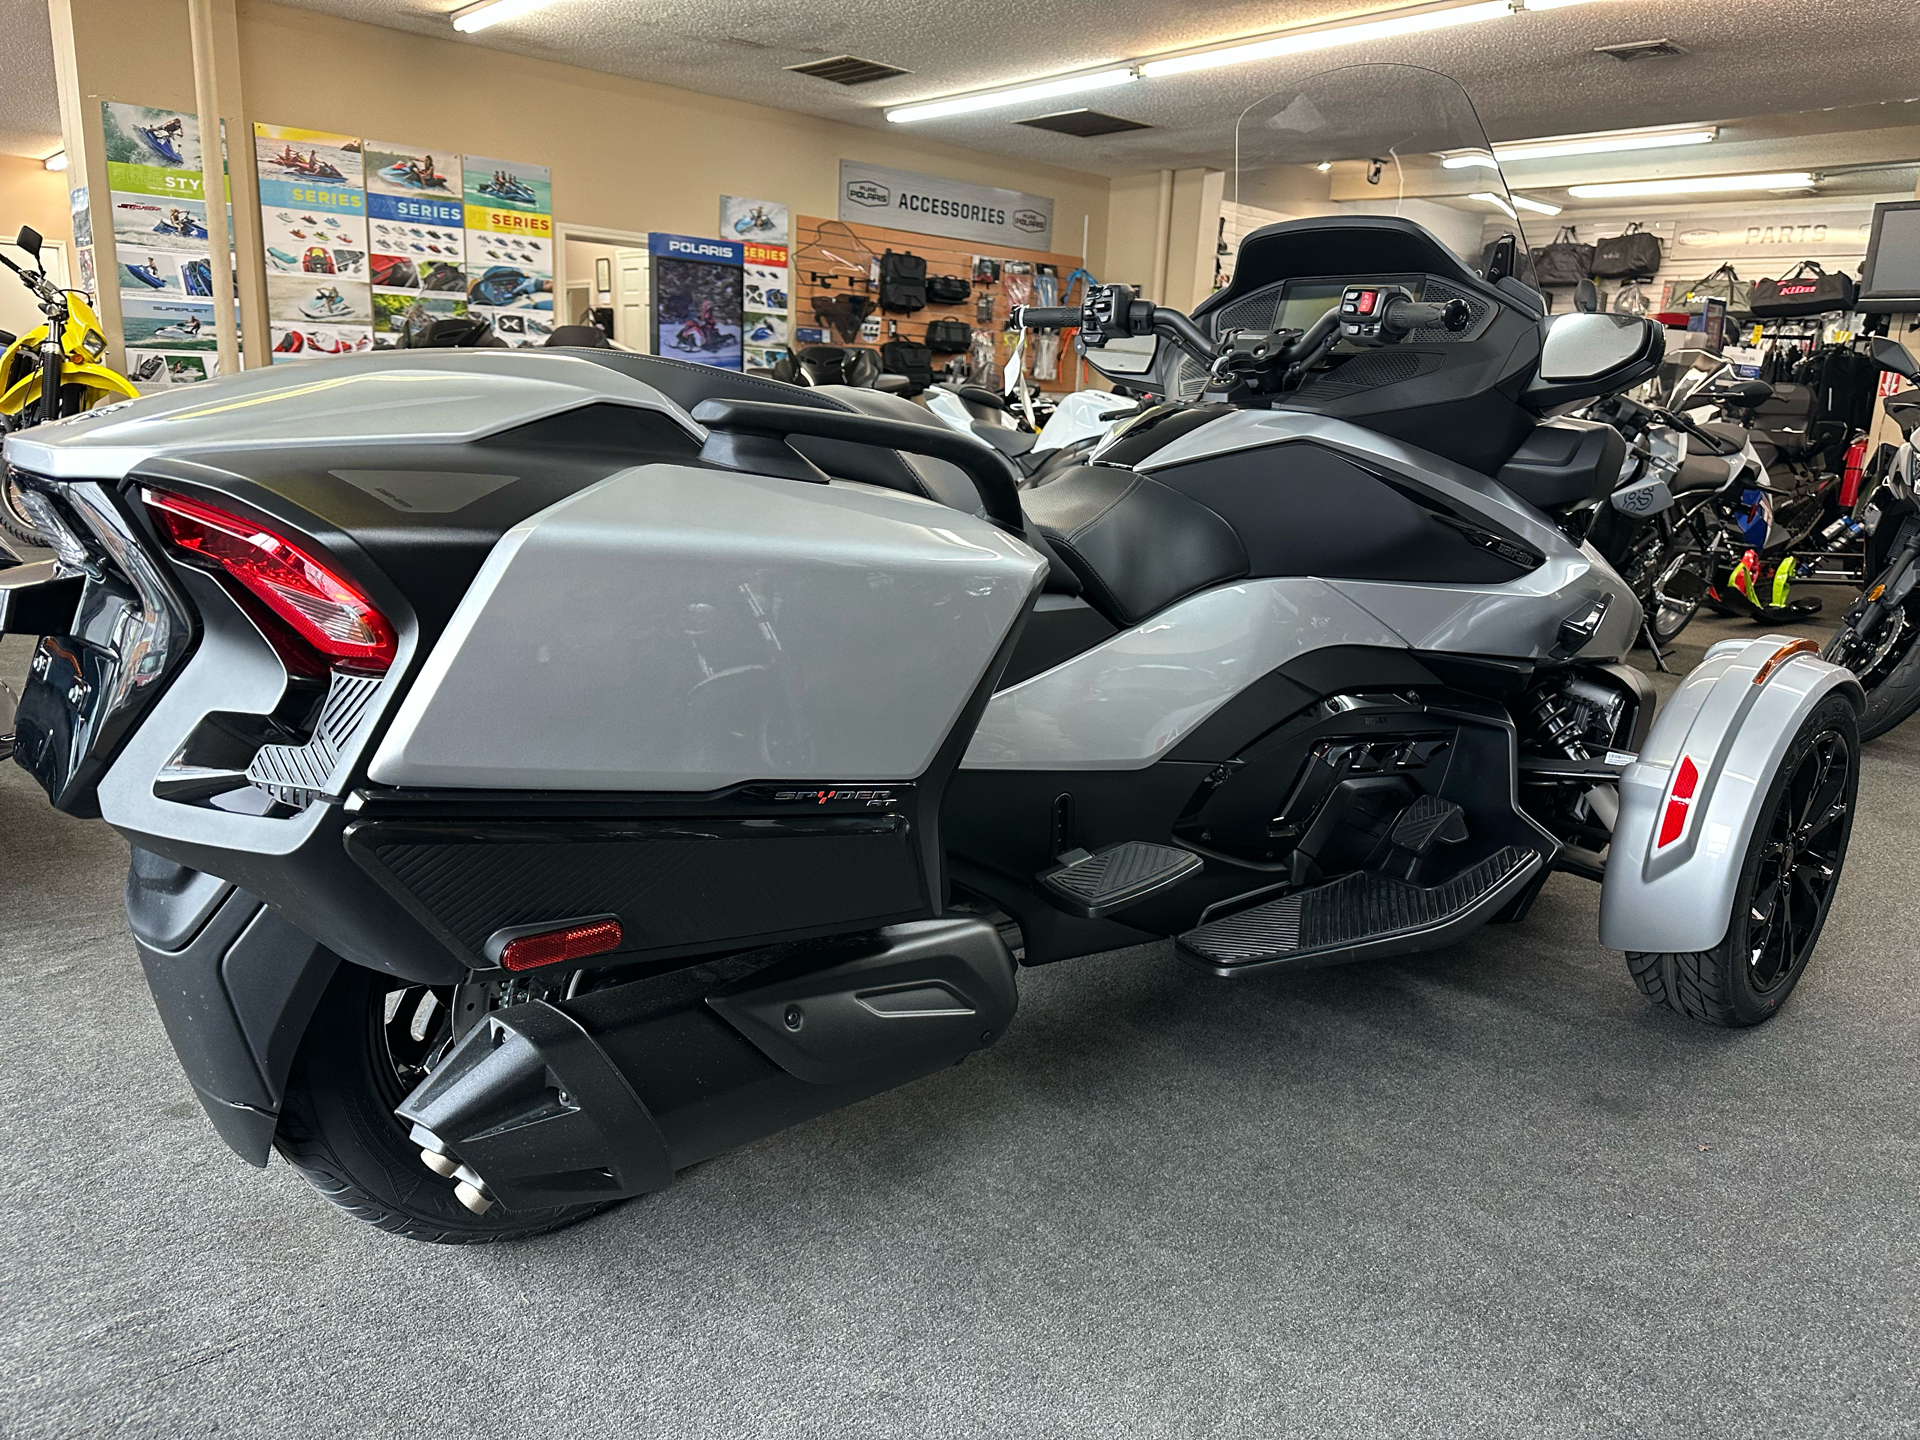 2024 Can-Am Spyder RT in North Chelmsford, Massachusetts - Photo 5